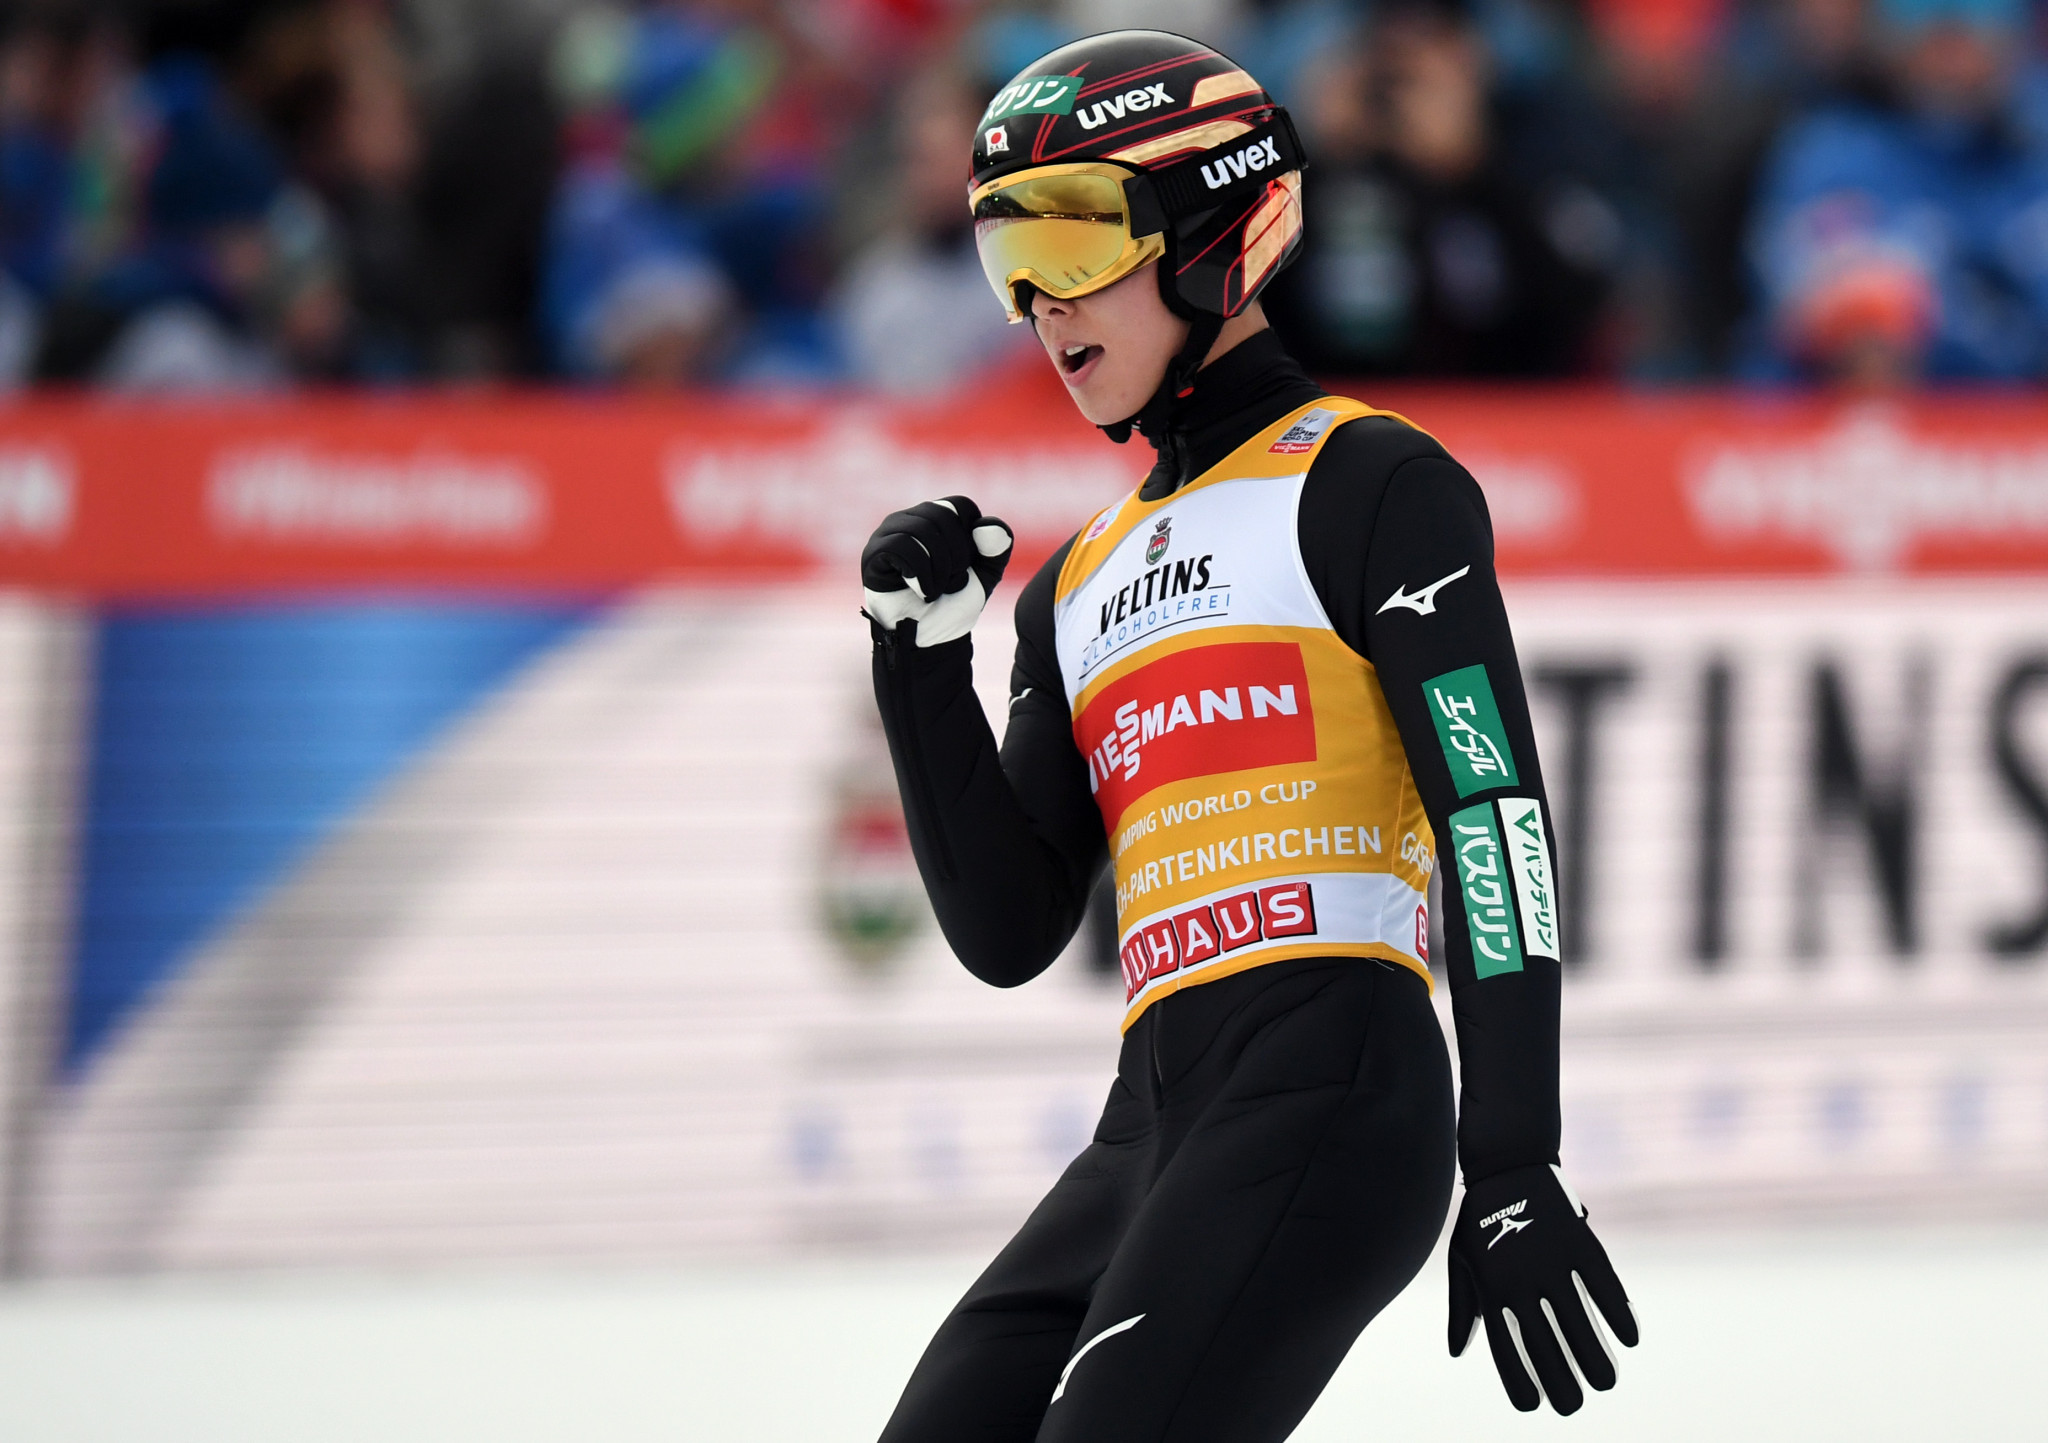 Ryoyu Kobayashi has won yet again in the FIS Ski Jumping World Cup and Four Hills Tournament to continue his magnificent form this season ©Getty Images